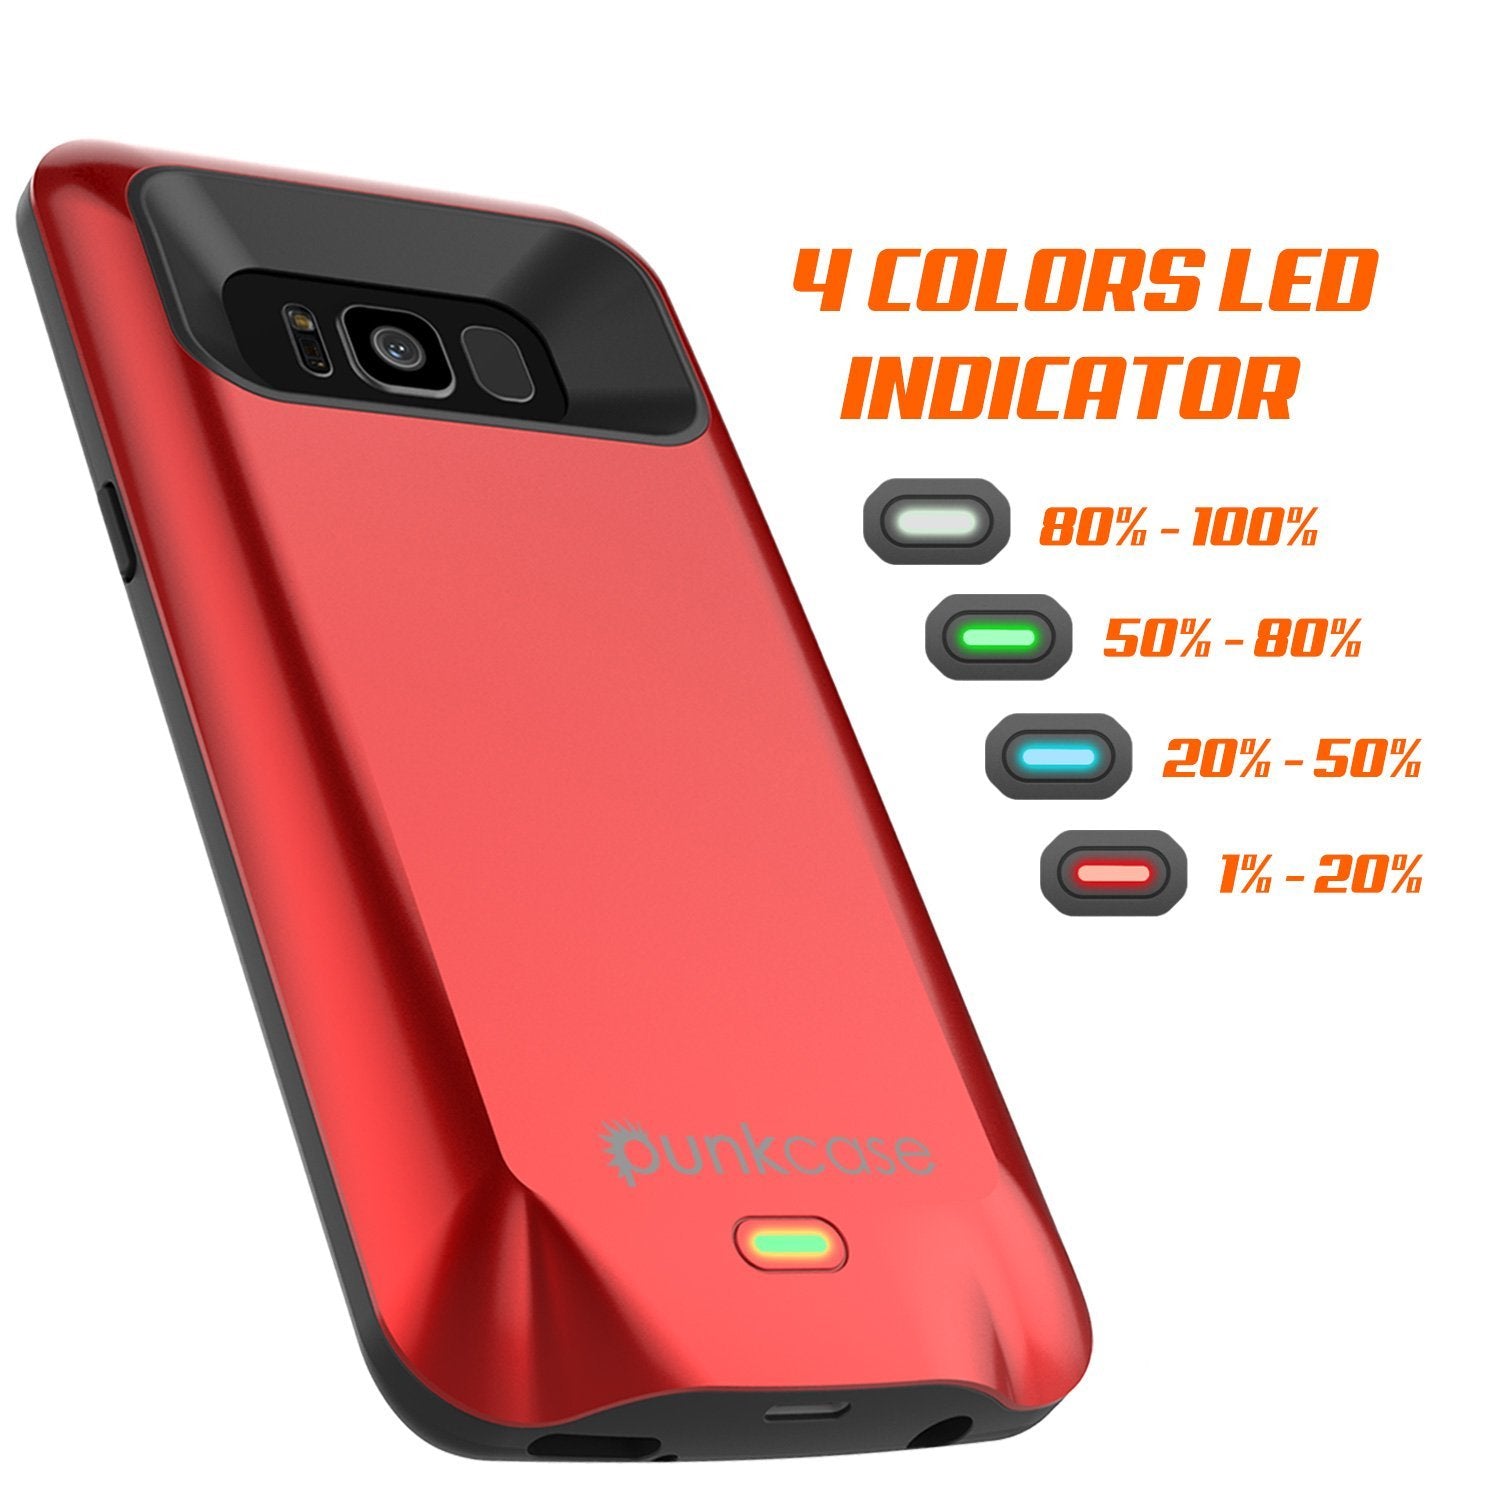 Galaxy S8 Plus Battery Case, 5500mAH Charger W/USB Port Case [Red]